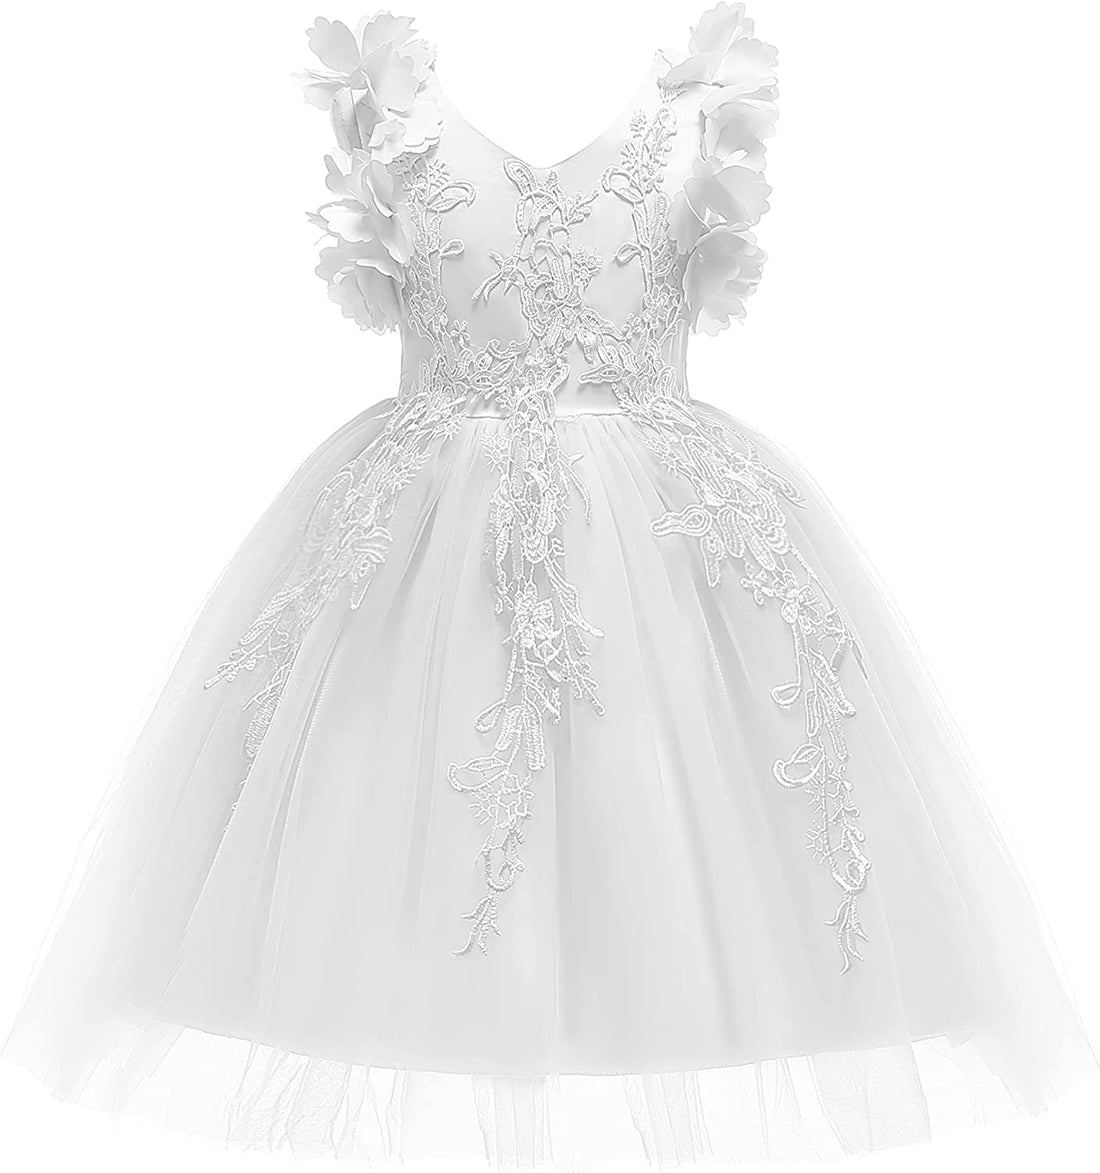 3D Butterfly Cuffs White Lace Tulle A-Line Flower Girl Dress